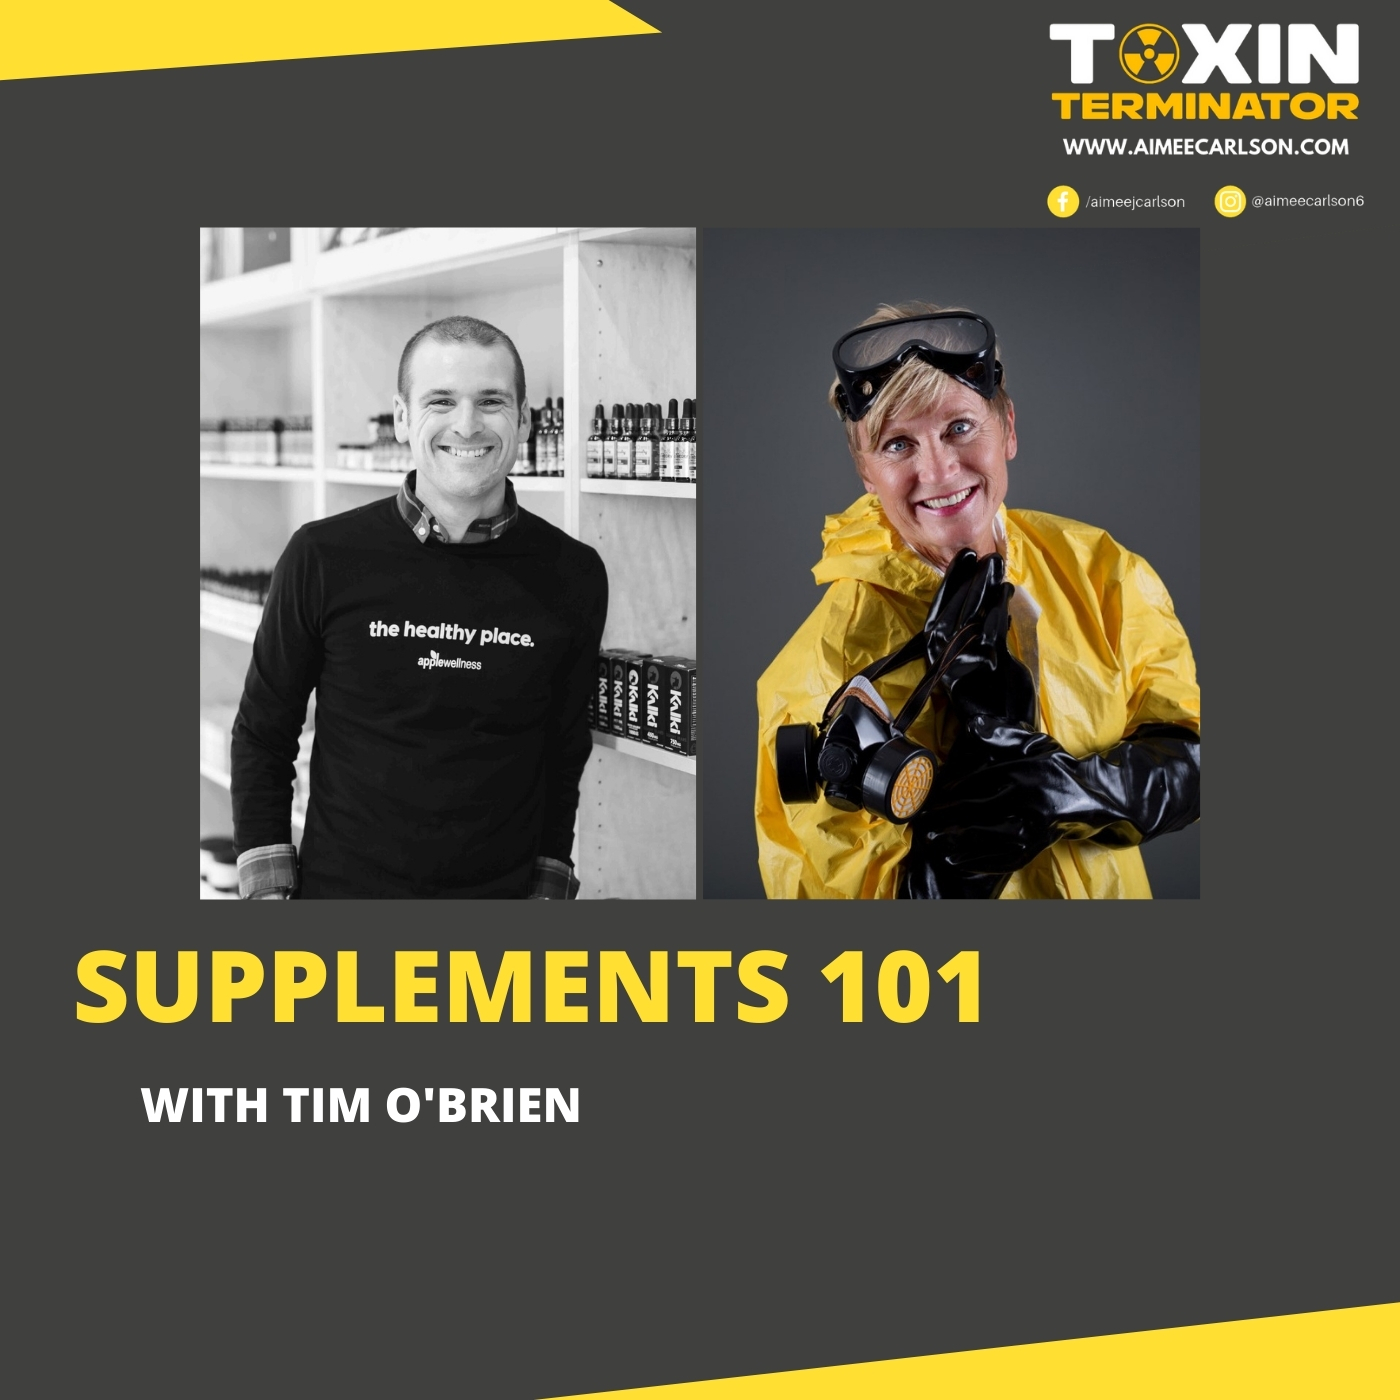 Supplements 101 with Tim O'Brien